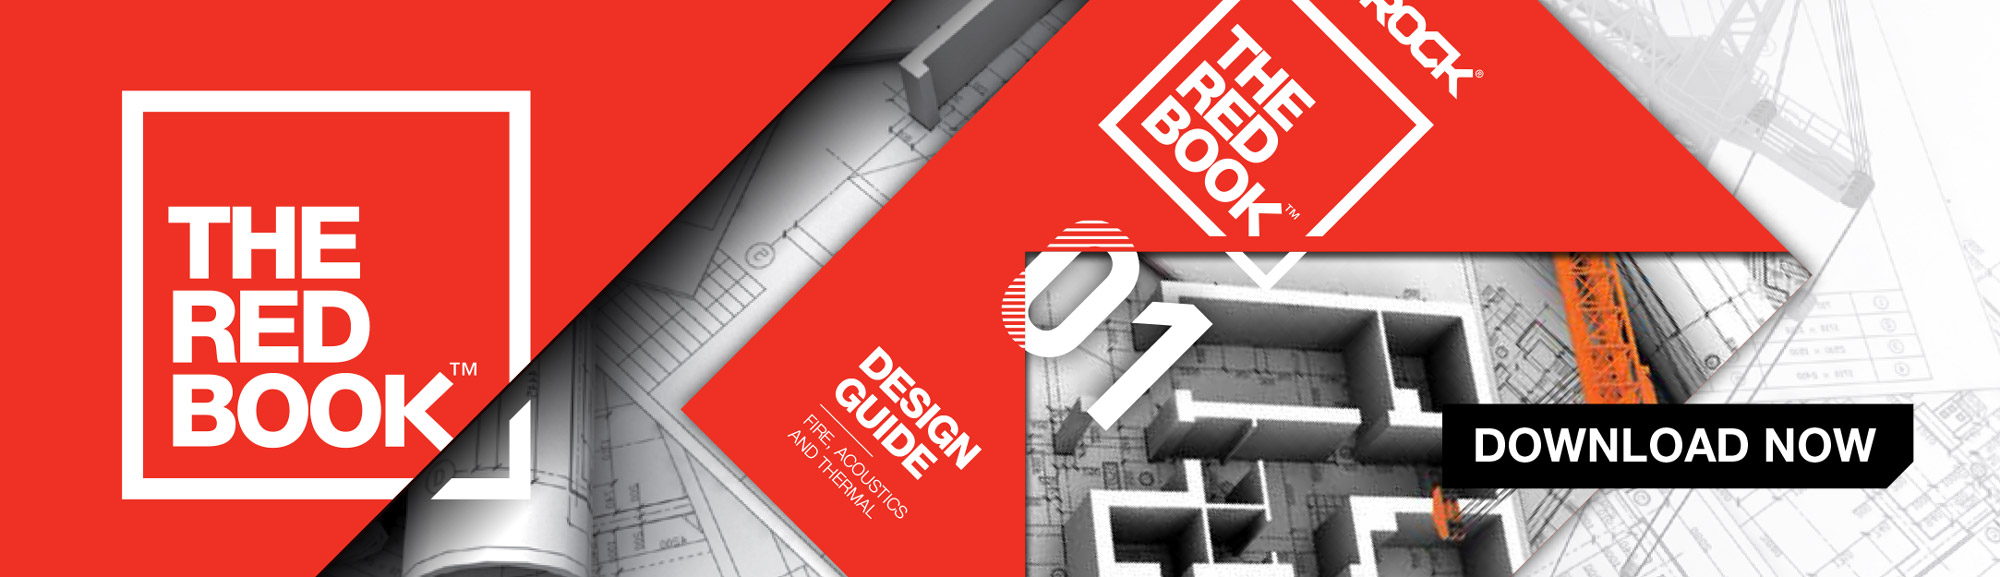 Red Book 01 Design Guide Banner